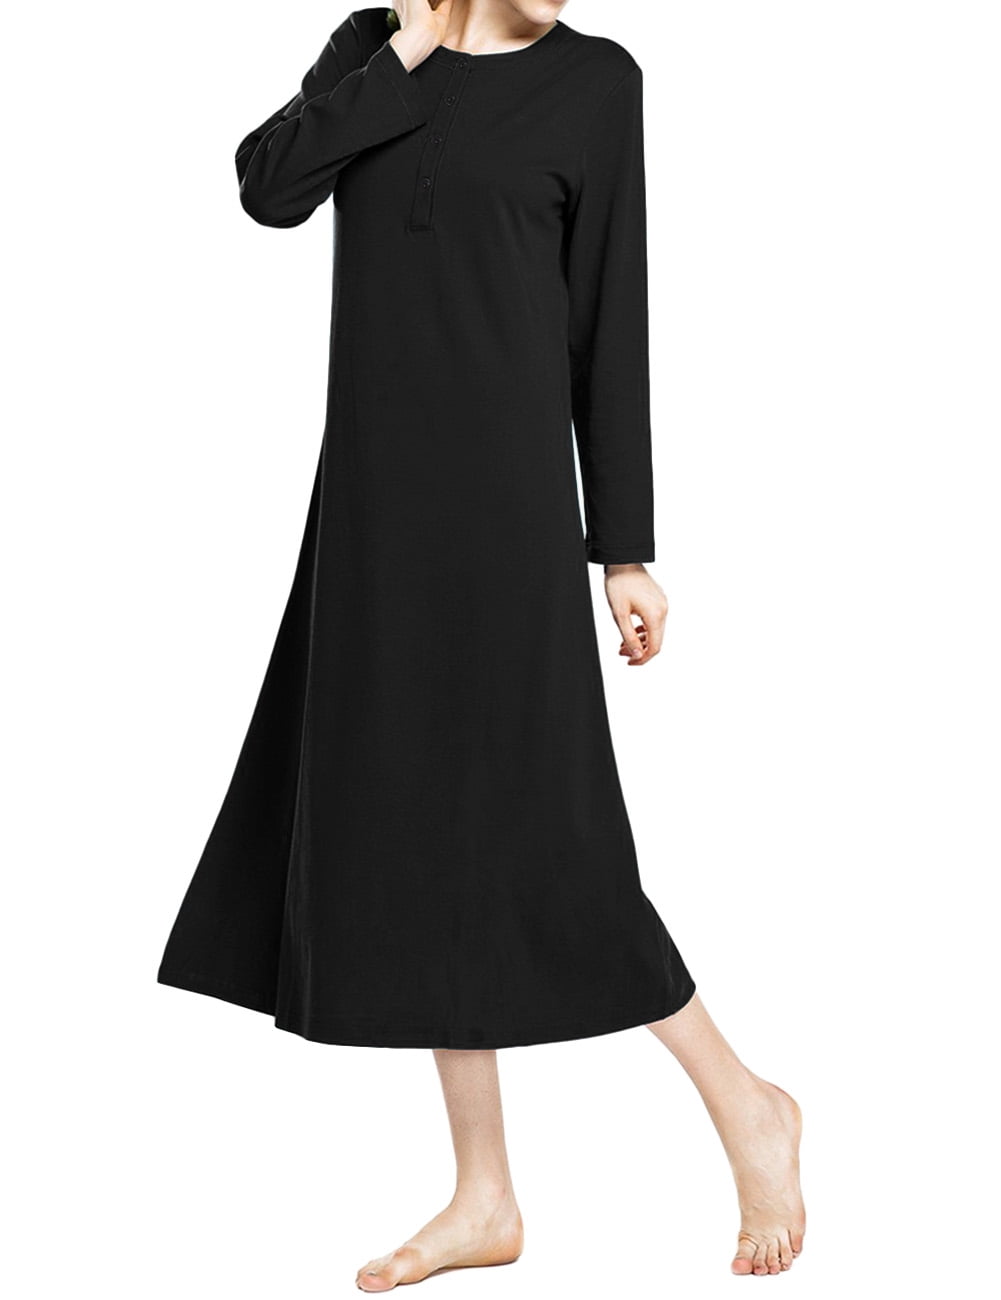 Cotton Knit Long Sleeve Nightgown For ...